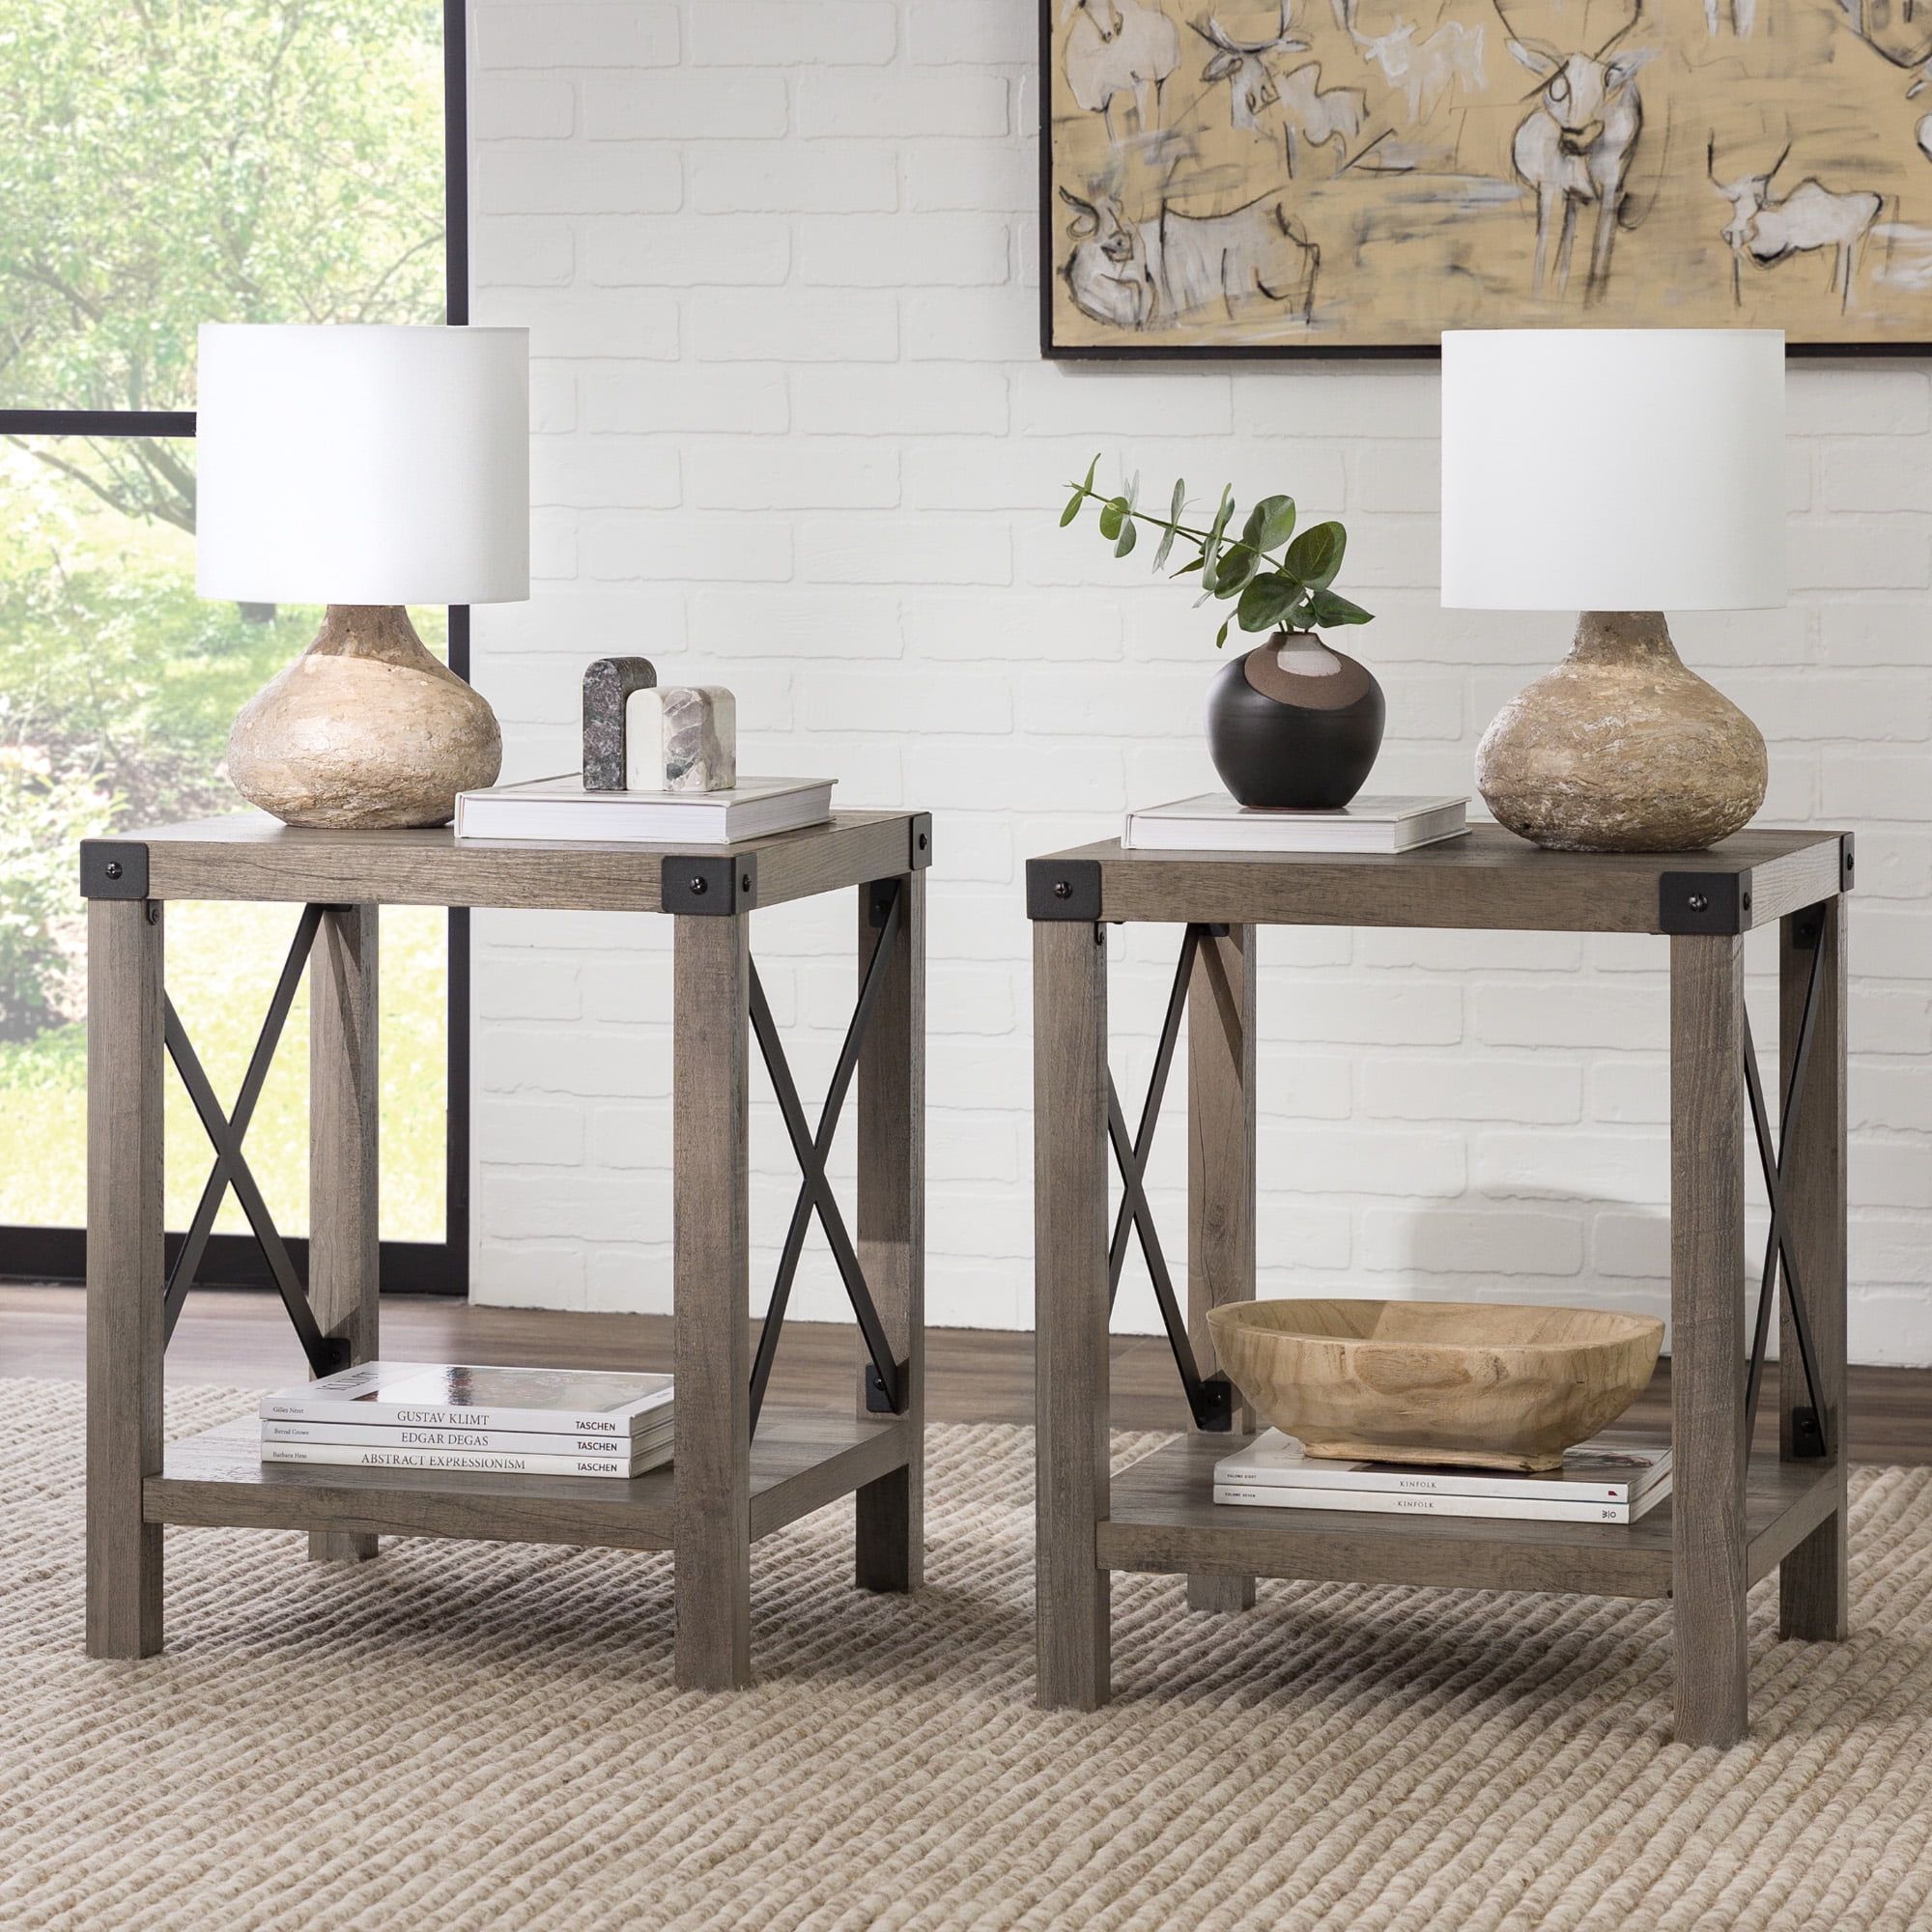 Woven Paths Magnolia Metal X Set Of 2 End Tables, Grey Wash – Walmart In Rustic Gray End Tables (View 6 of 15)